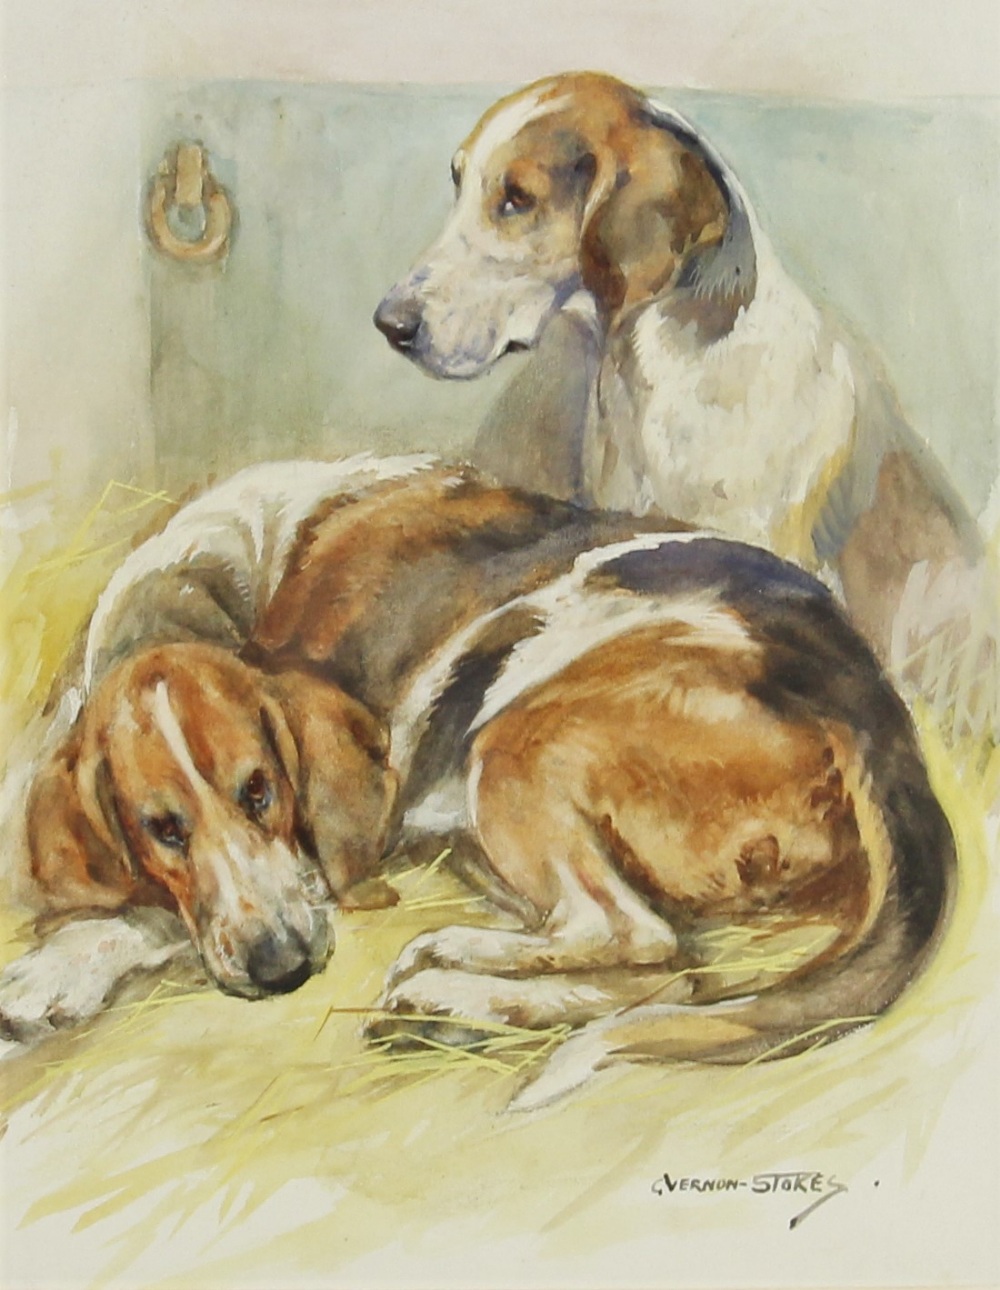 George Vernon Stokes (1873-1954), Kennelled hounds, Watercolour and gouache on paper, Signed lower